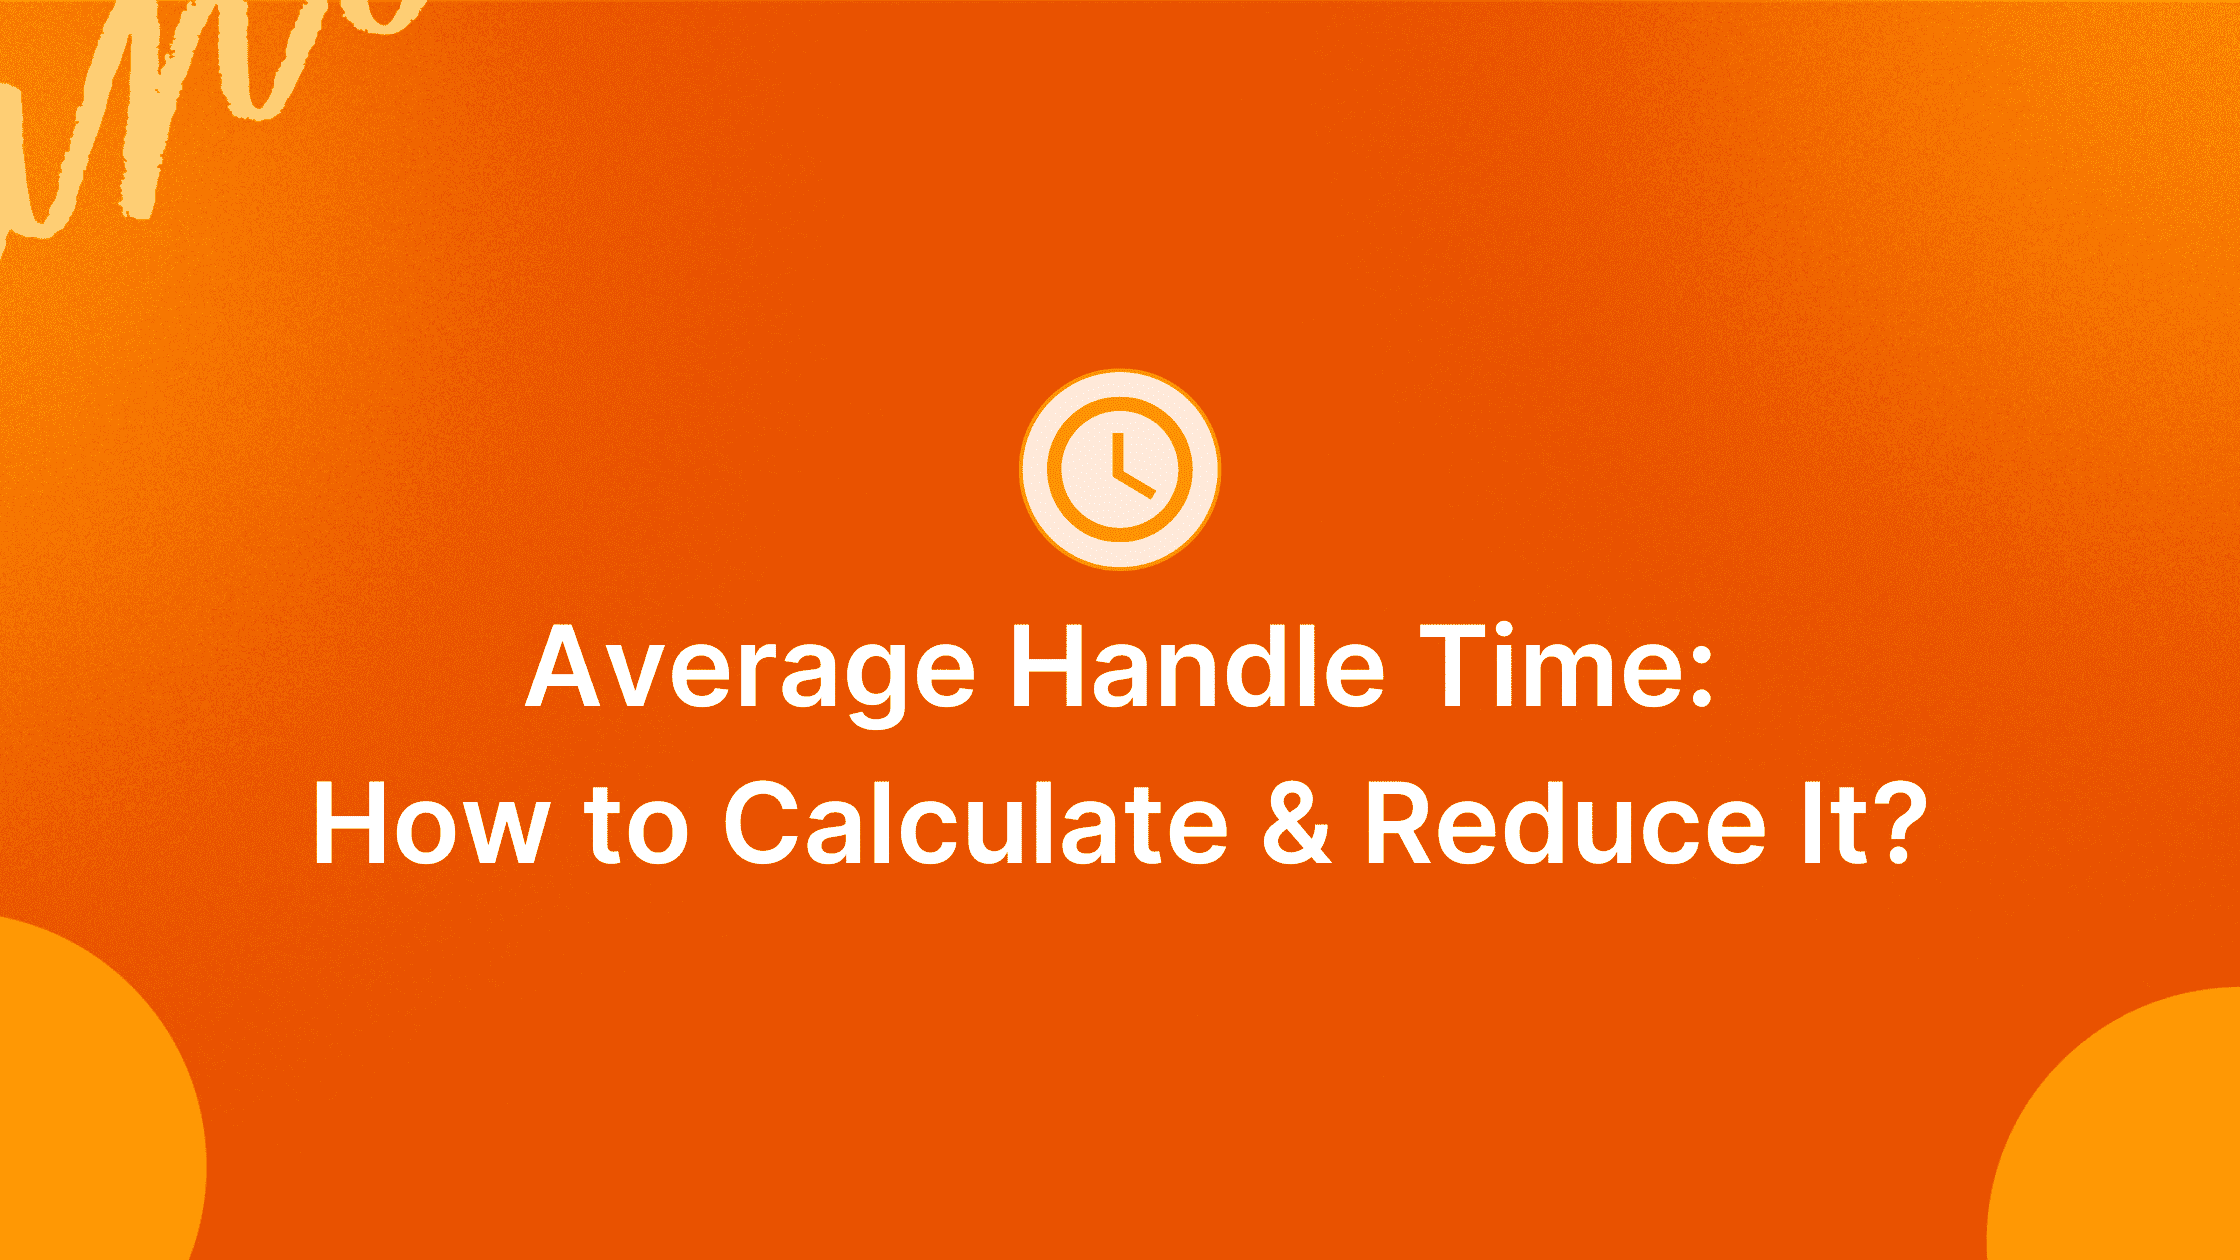 What Is Average Handle Time (AHT) and How to Calculate and Reduce It?